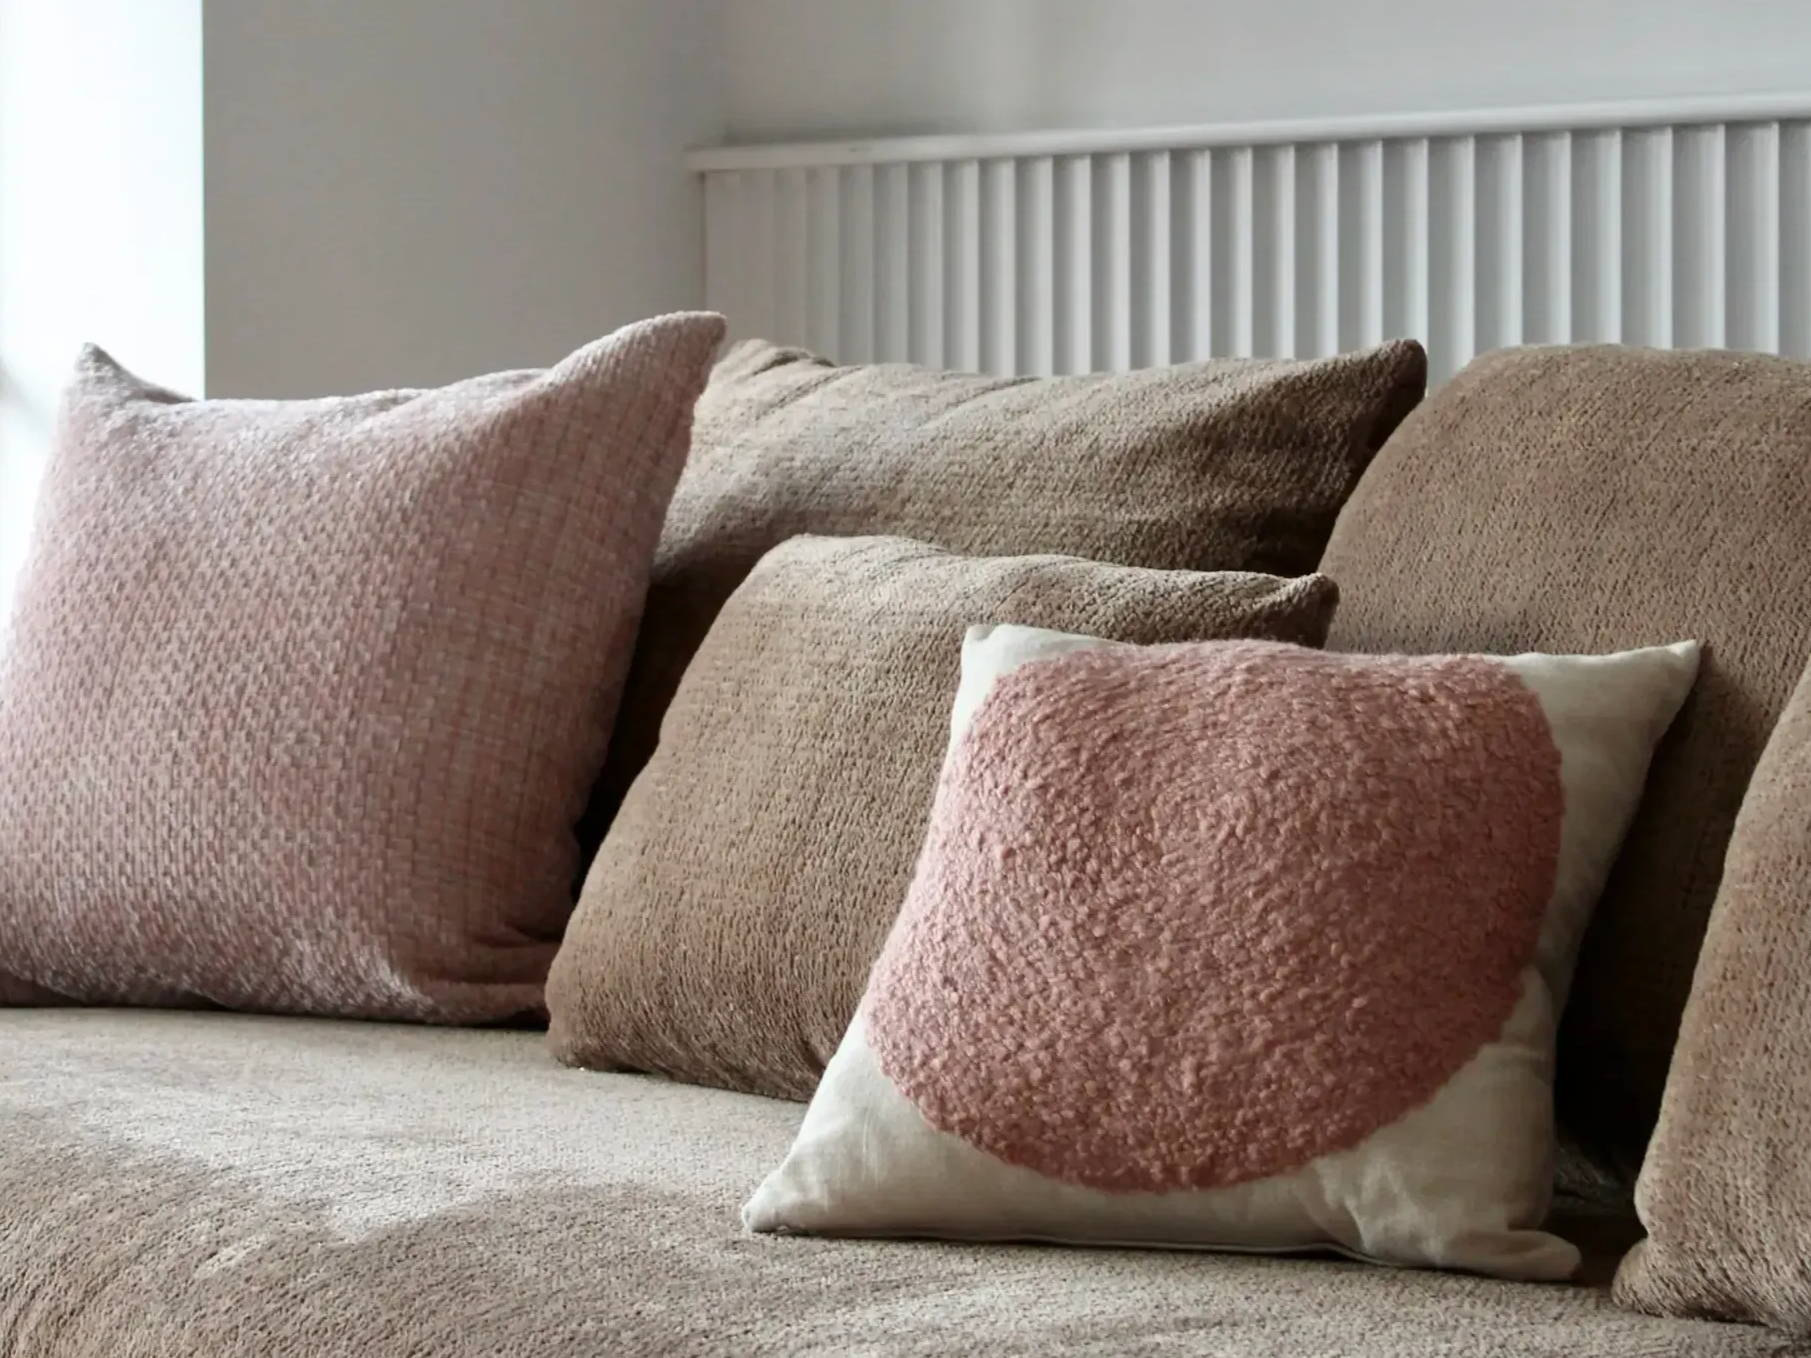 Pale pink and brown cushions on sofa.